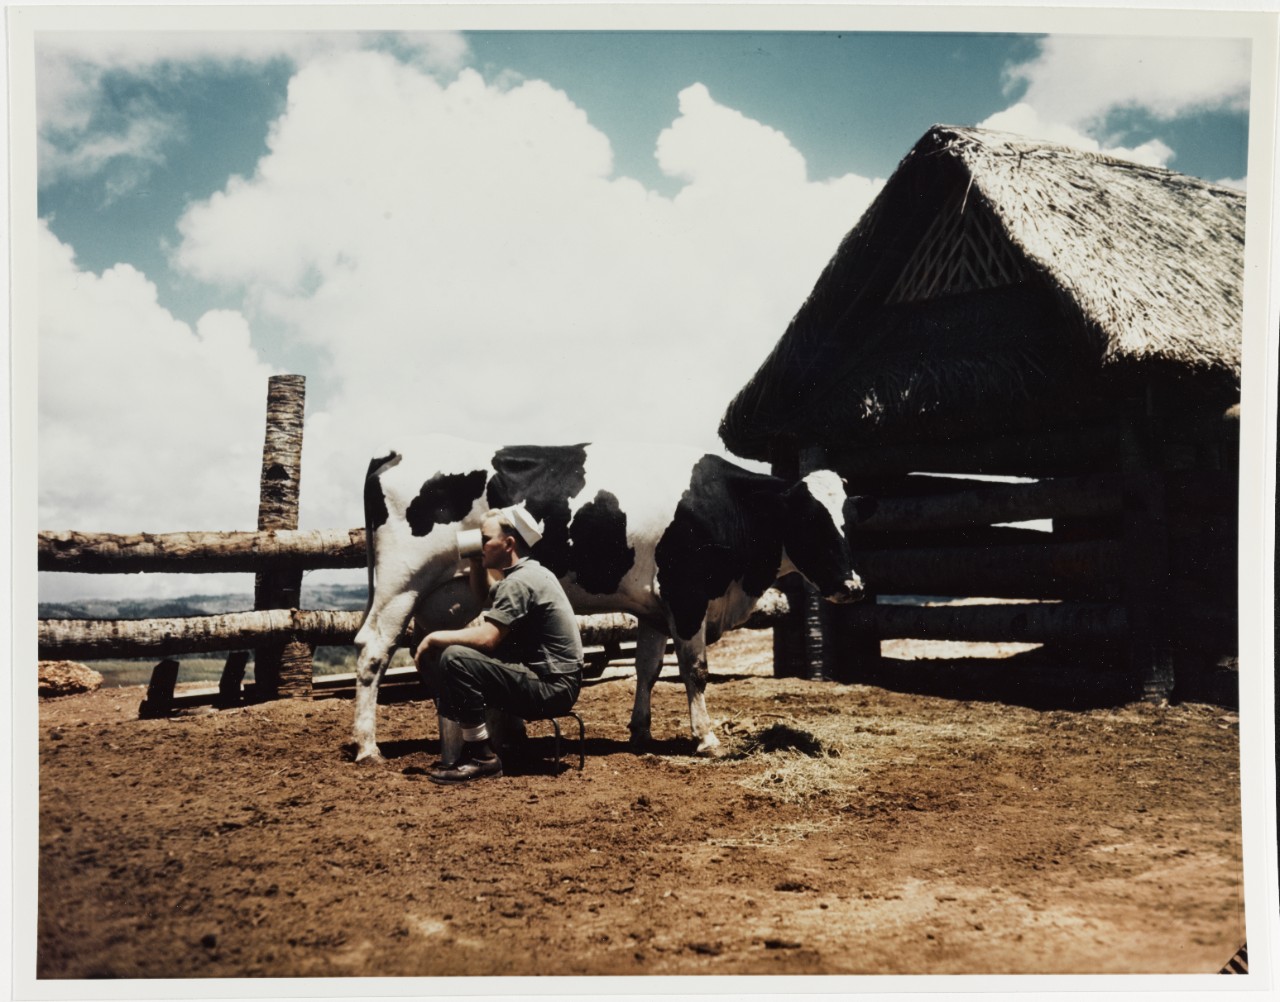 Sailor takes a break while milking a cow on Guam in June, 1945